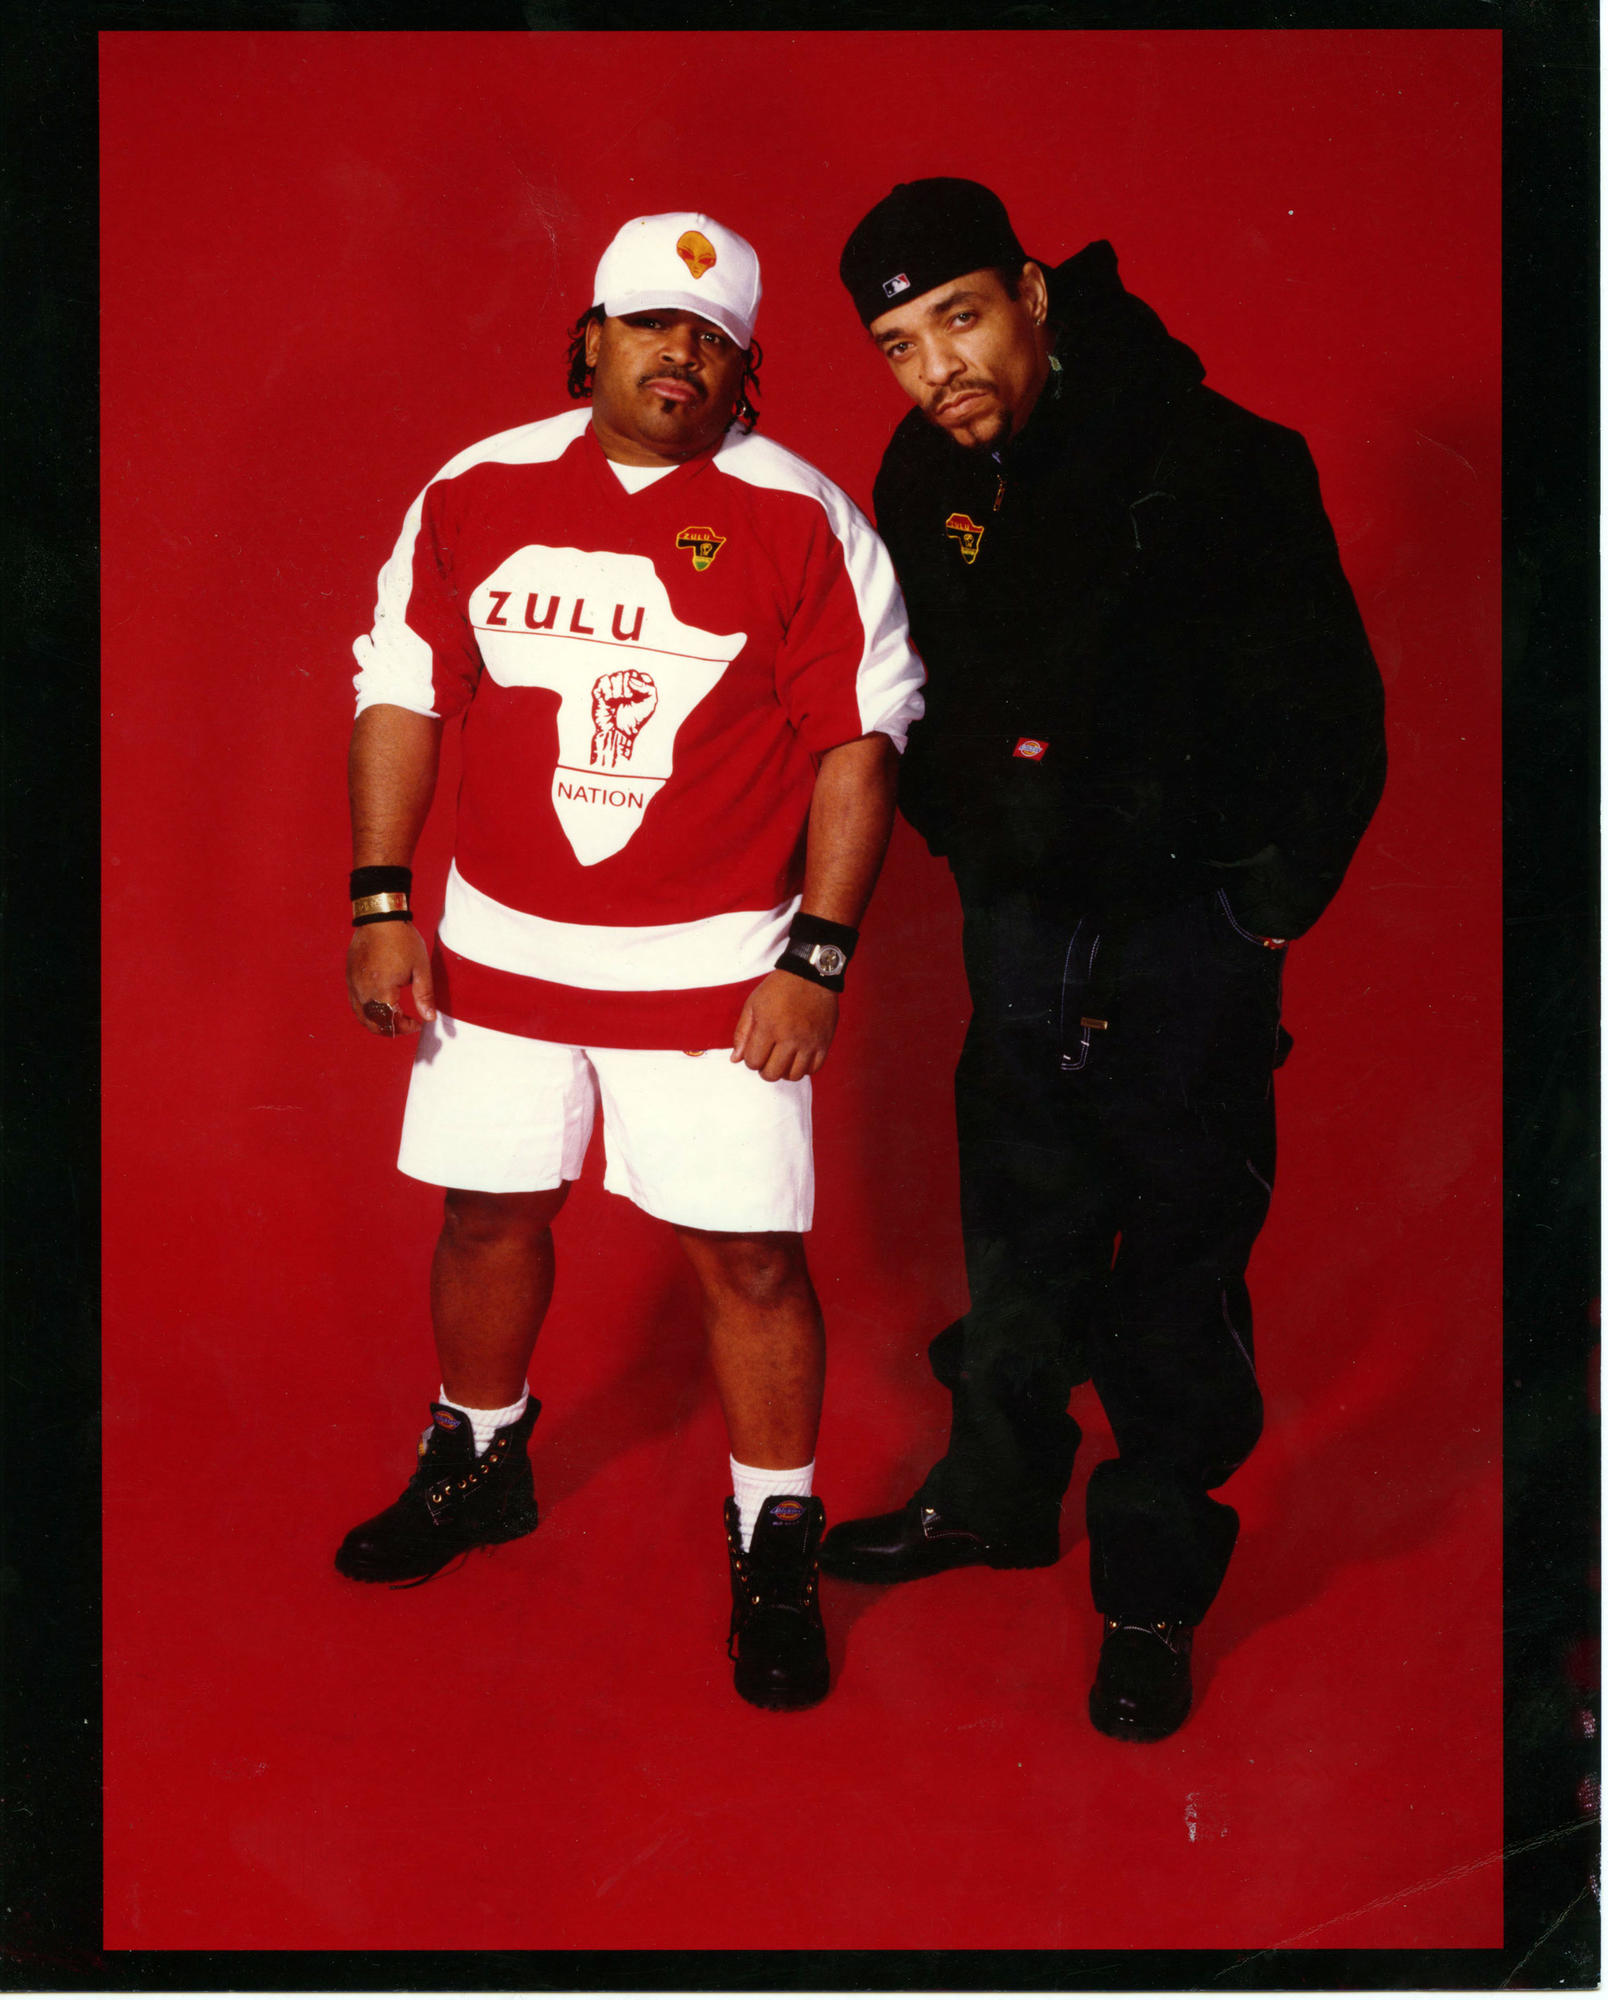 Photo by Jeff Oto, courtesy of the Ice T Afrika Islam Private Collection at HipHop-History.com